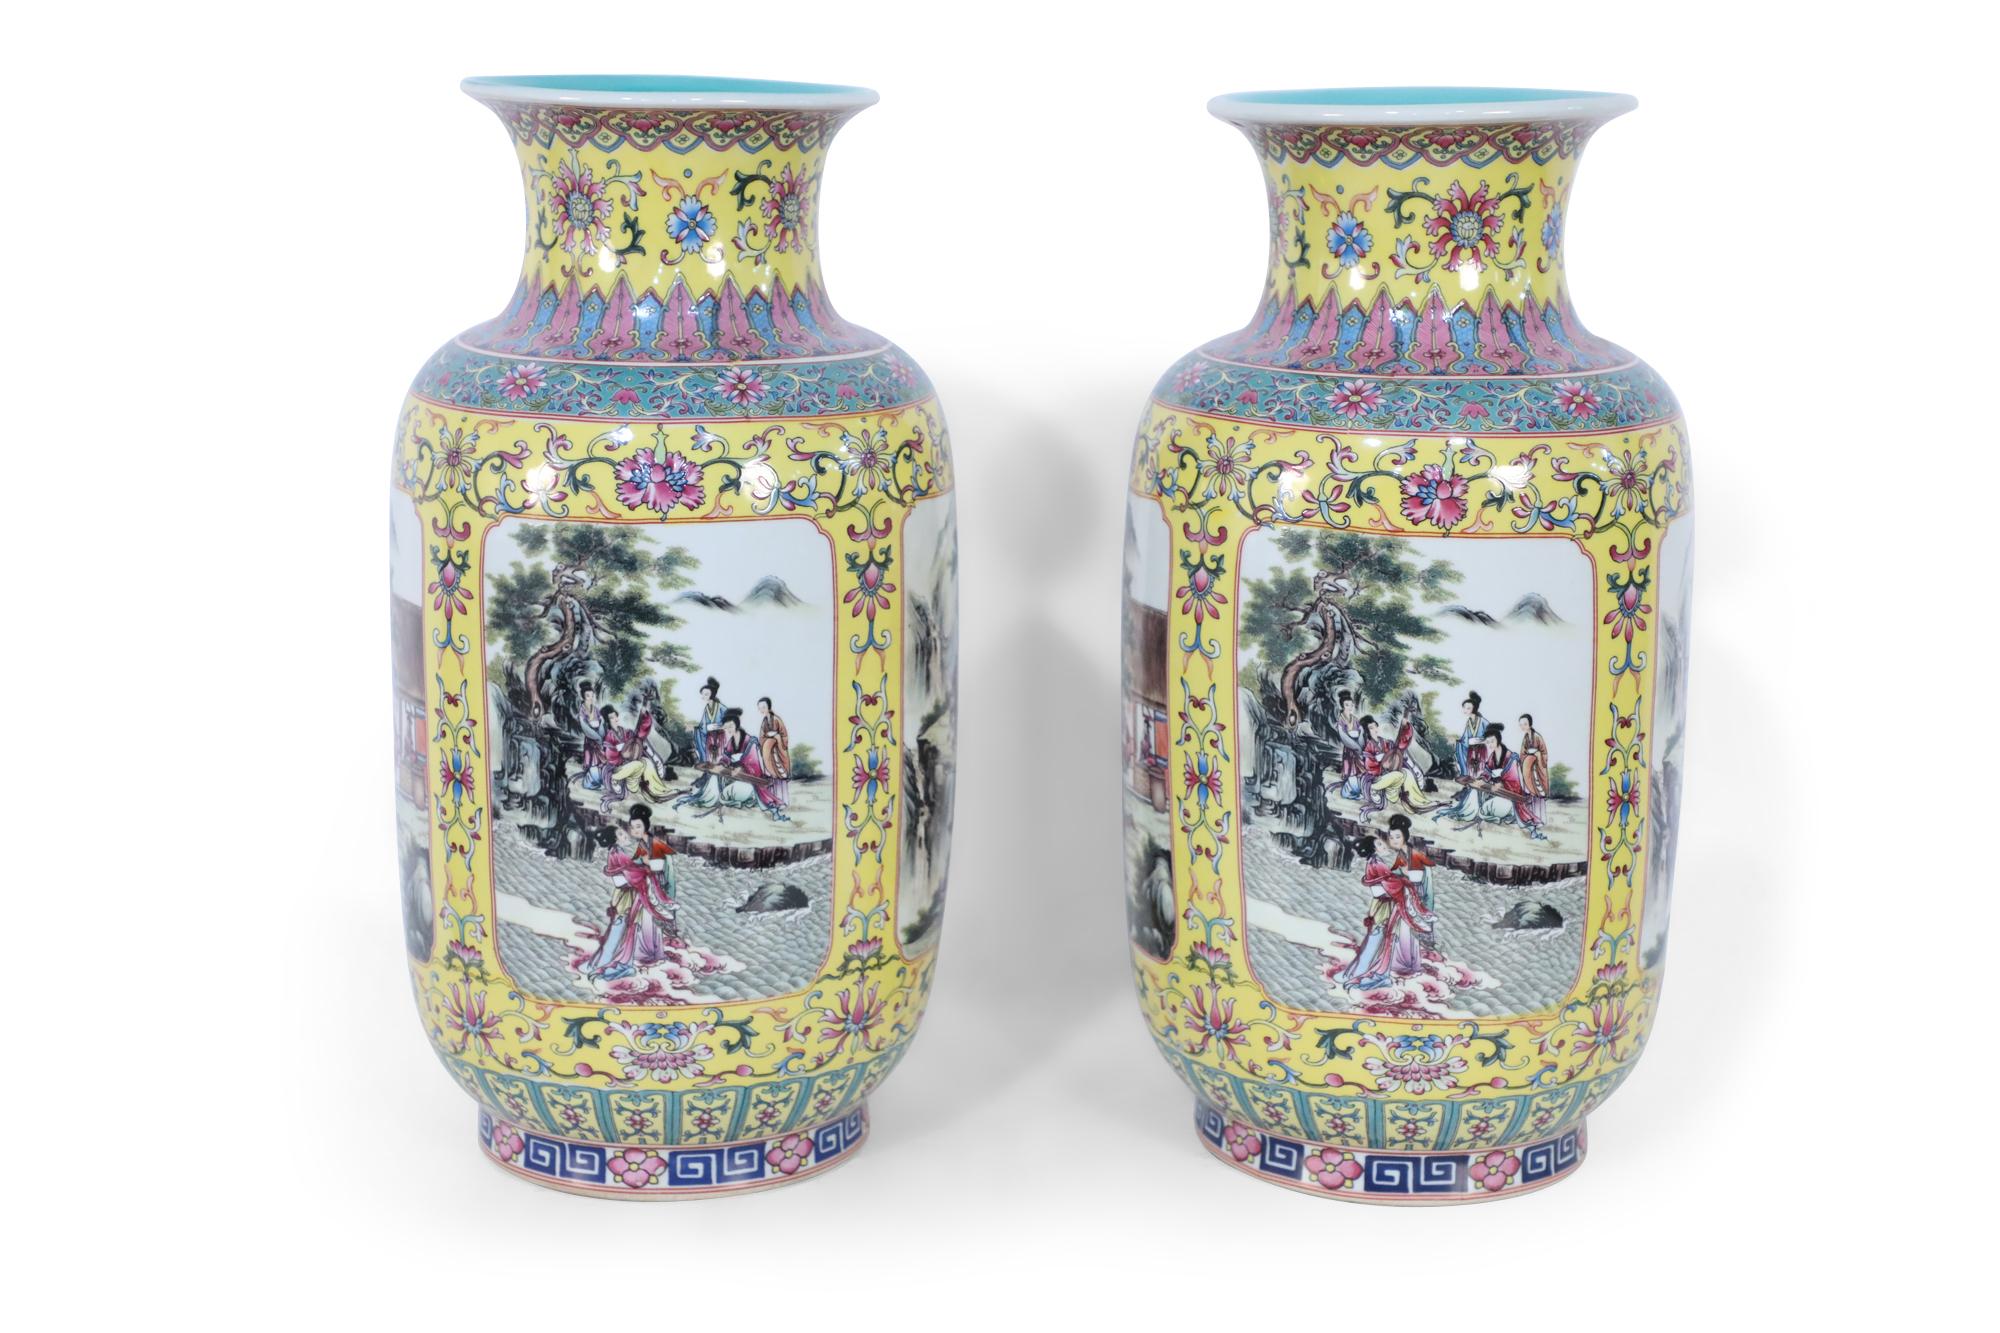 Chinese Export Pair of Chinese Yellow and Turquoise Genre Vignette Porcelain Vases